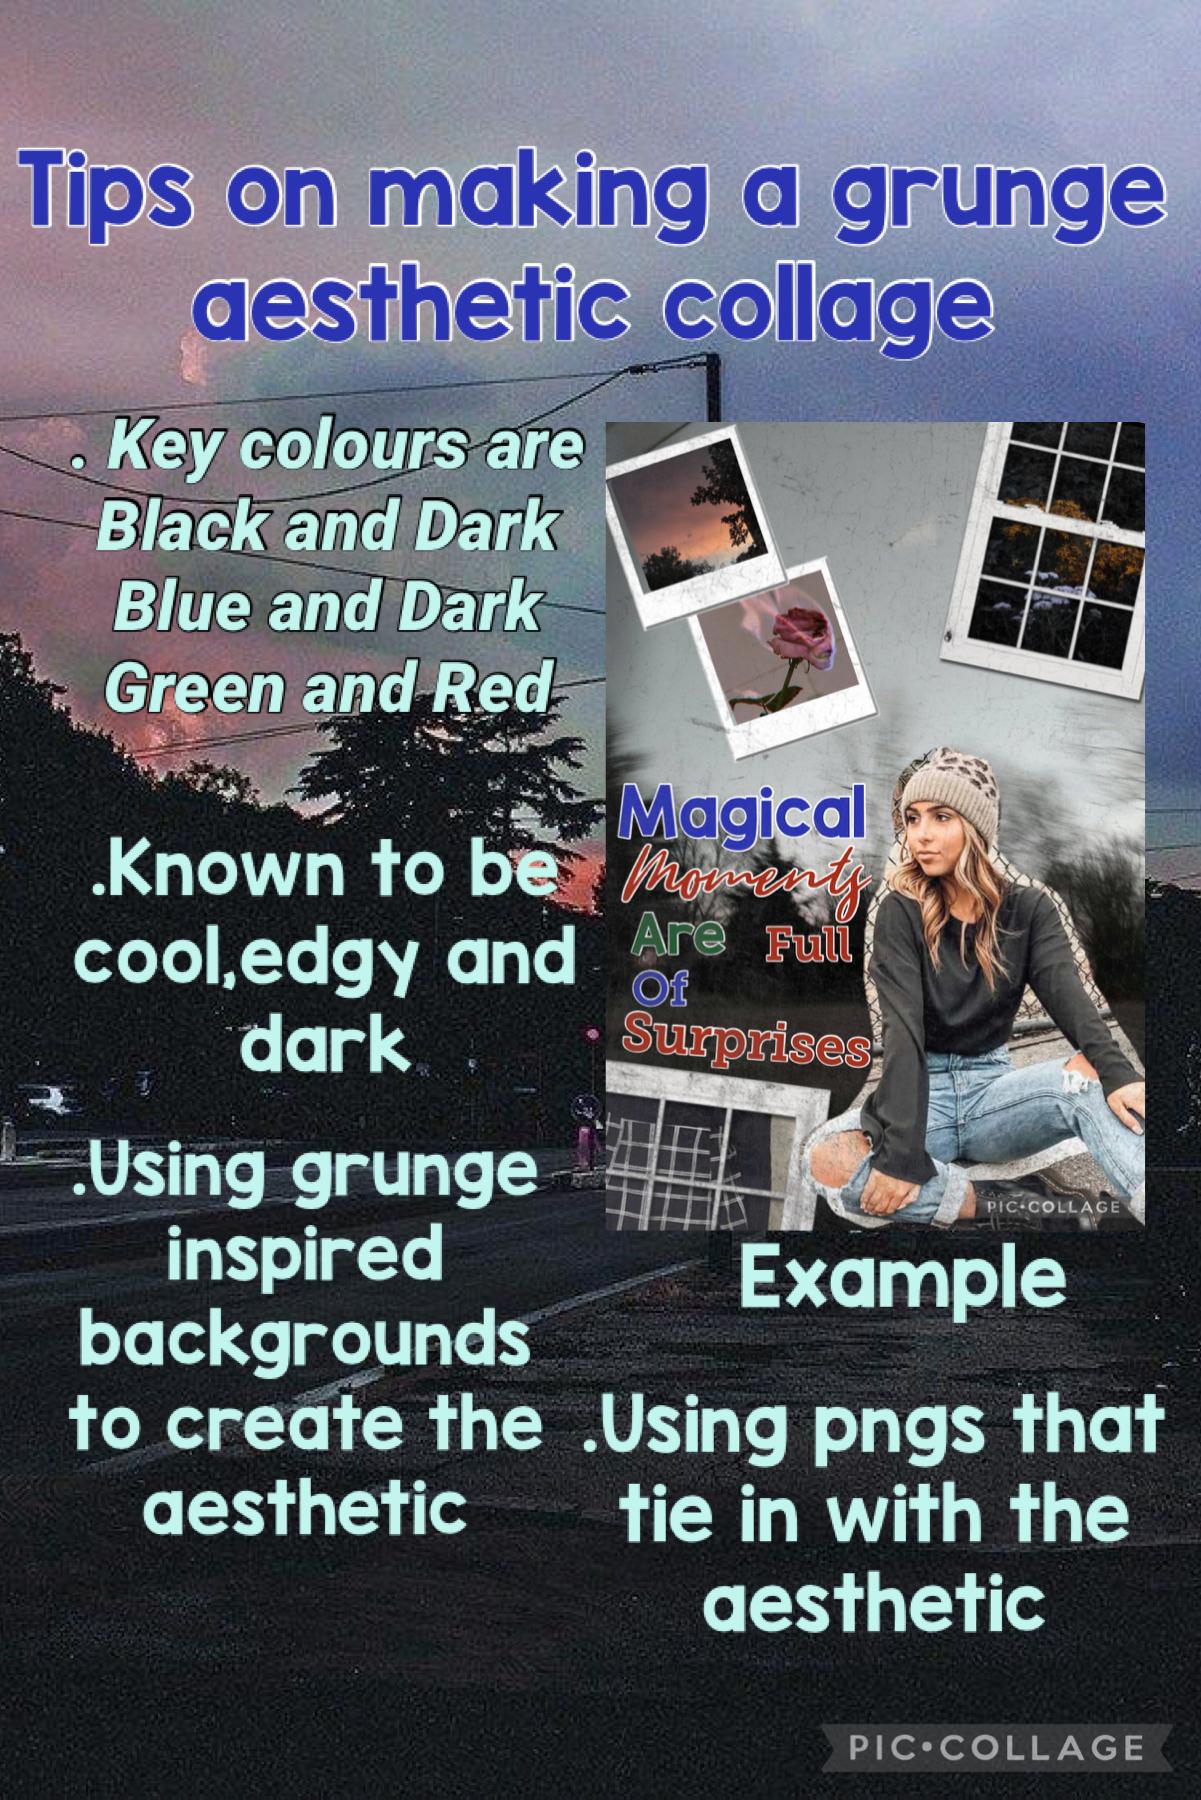 Tips on making a grunge aesthetic collage 